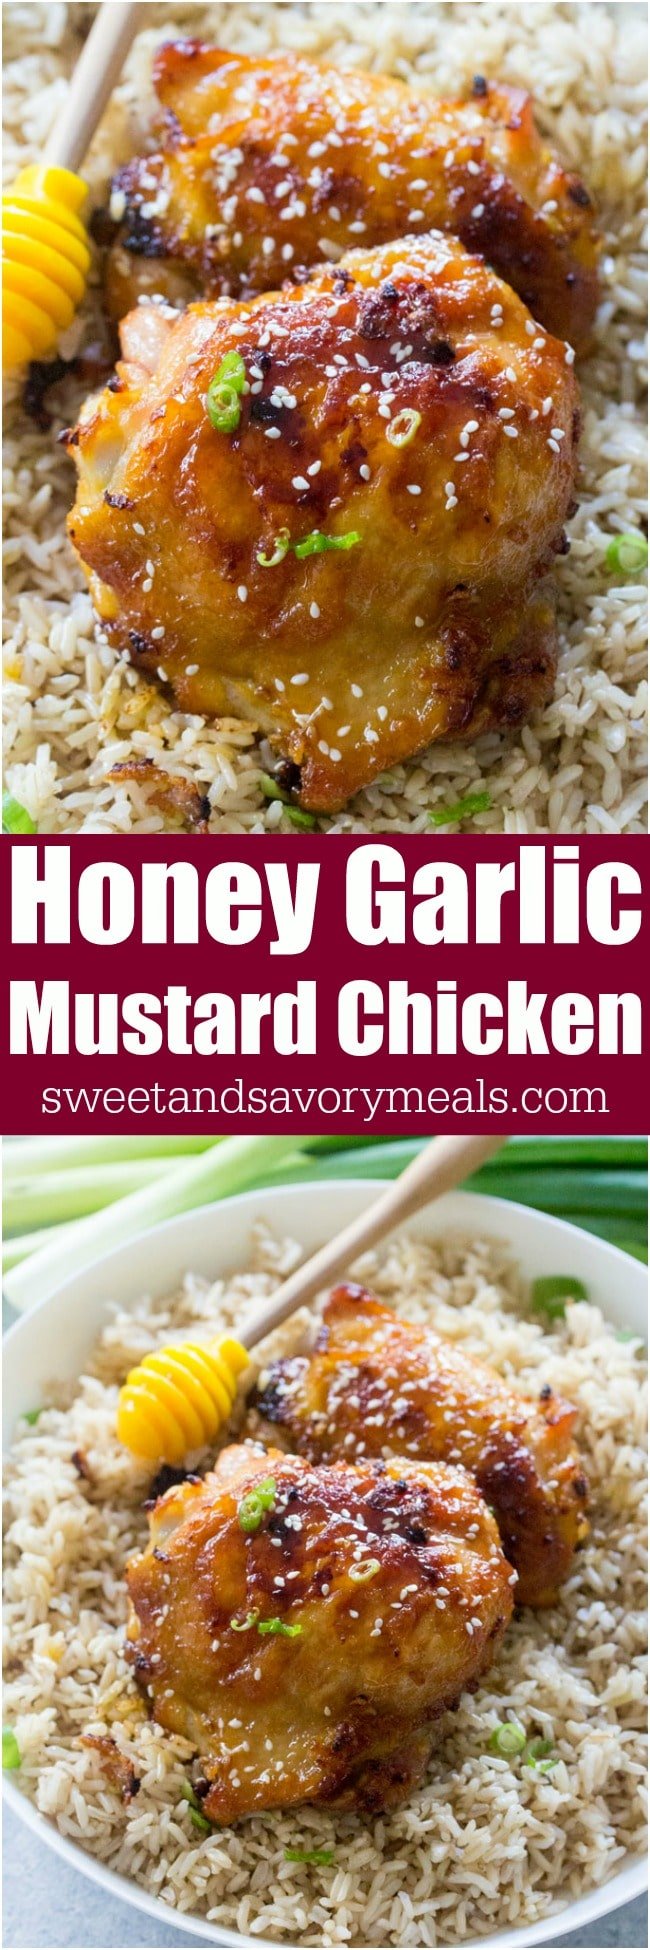 One Pan Honey Garlic Mustard Chicken made with just 6 ingredients, makes weeknight dinners easy and delicious.